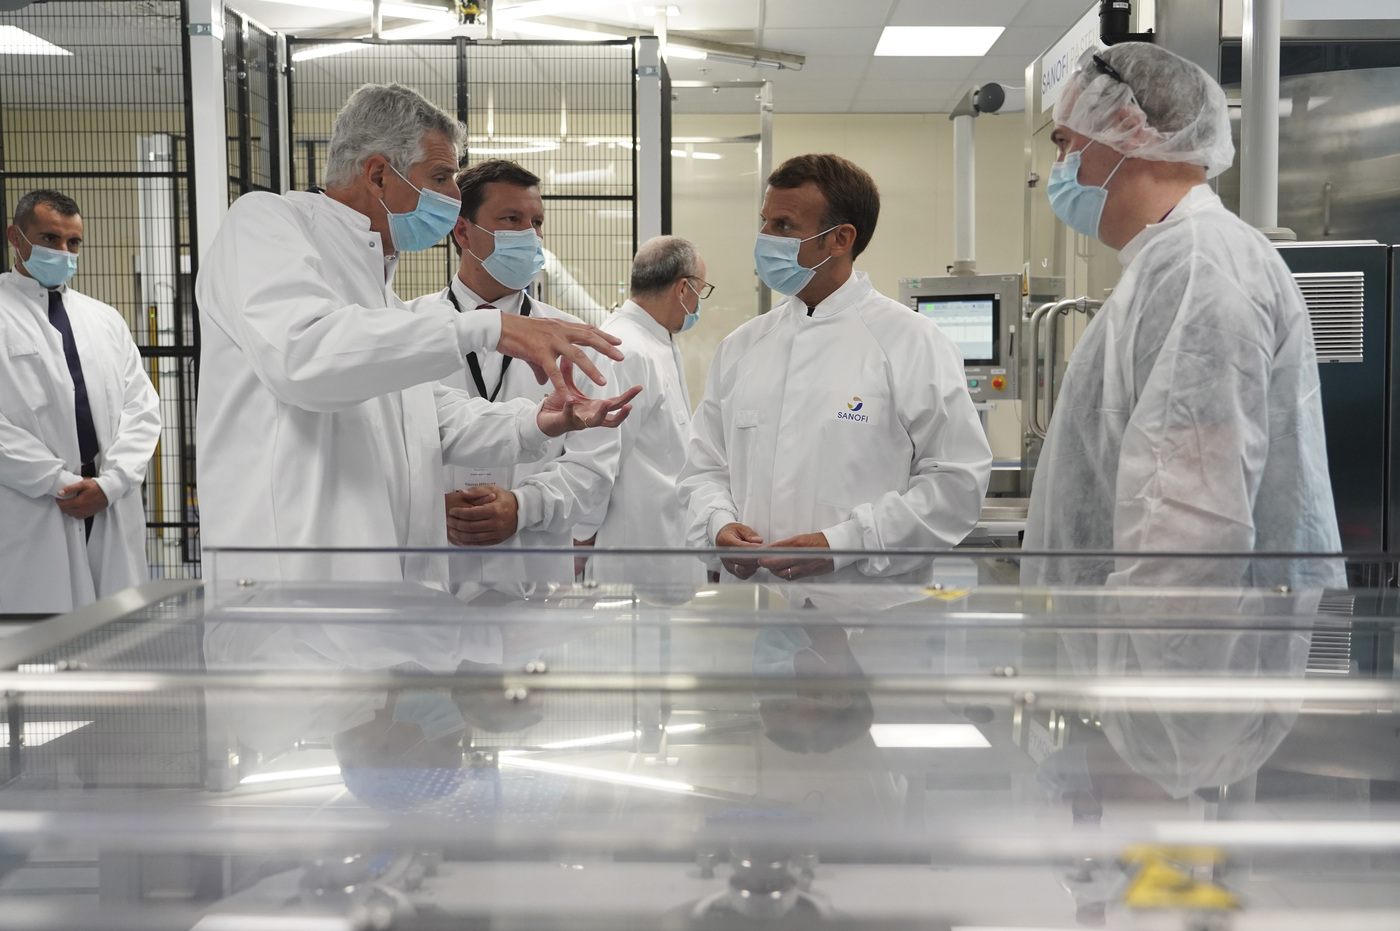 French President Emmanuel Macron listens to a researcher as he visits an industrial development laboratory at French drugmaker's vaccine unit Sanofi Pasteur plant in Marcy-l'Etoile, near Lyon, central France, Tuesday, June 16, 2020.The visit comes after rival pharmaceutical company AstraZeneca this weekend announced a deal to supply 400 million vaccine doses to EU countries, including France. (AP Photo/Laurent Cipriani, Pool)